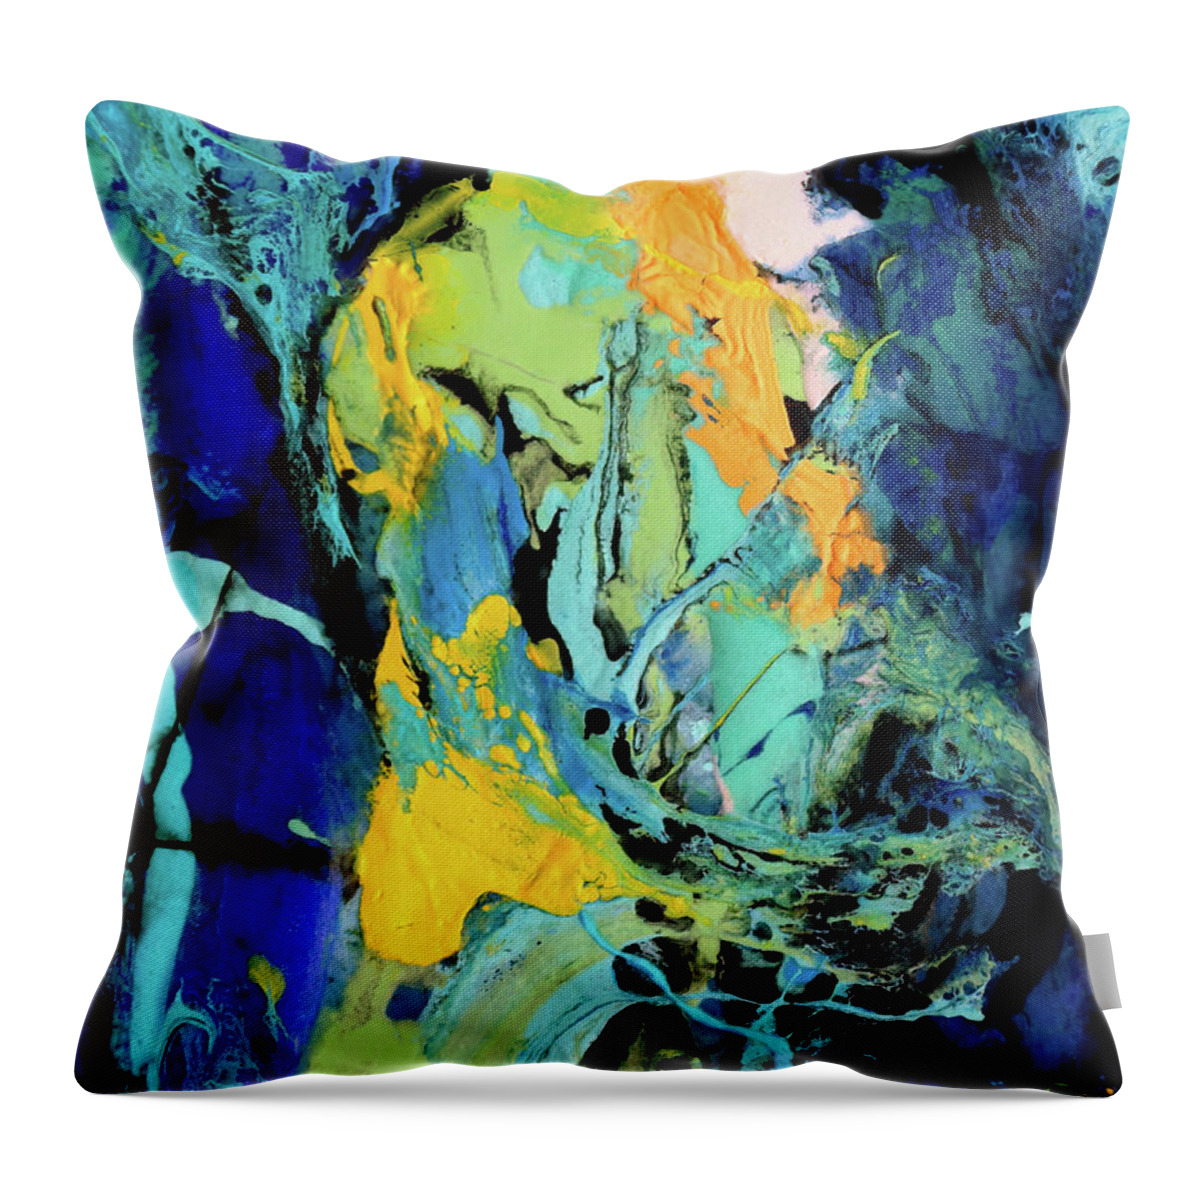 Resin Art Throw Pillow featuring the painting Midnight Train 5 by Jane Biven